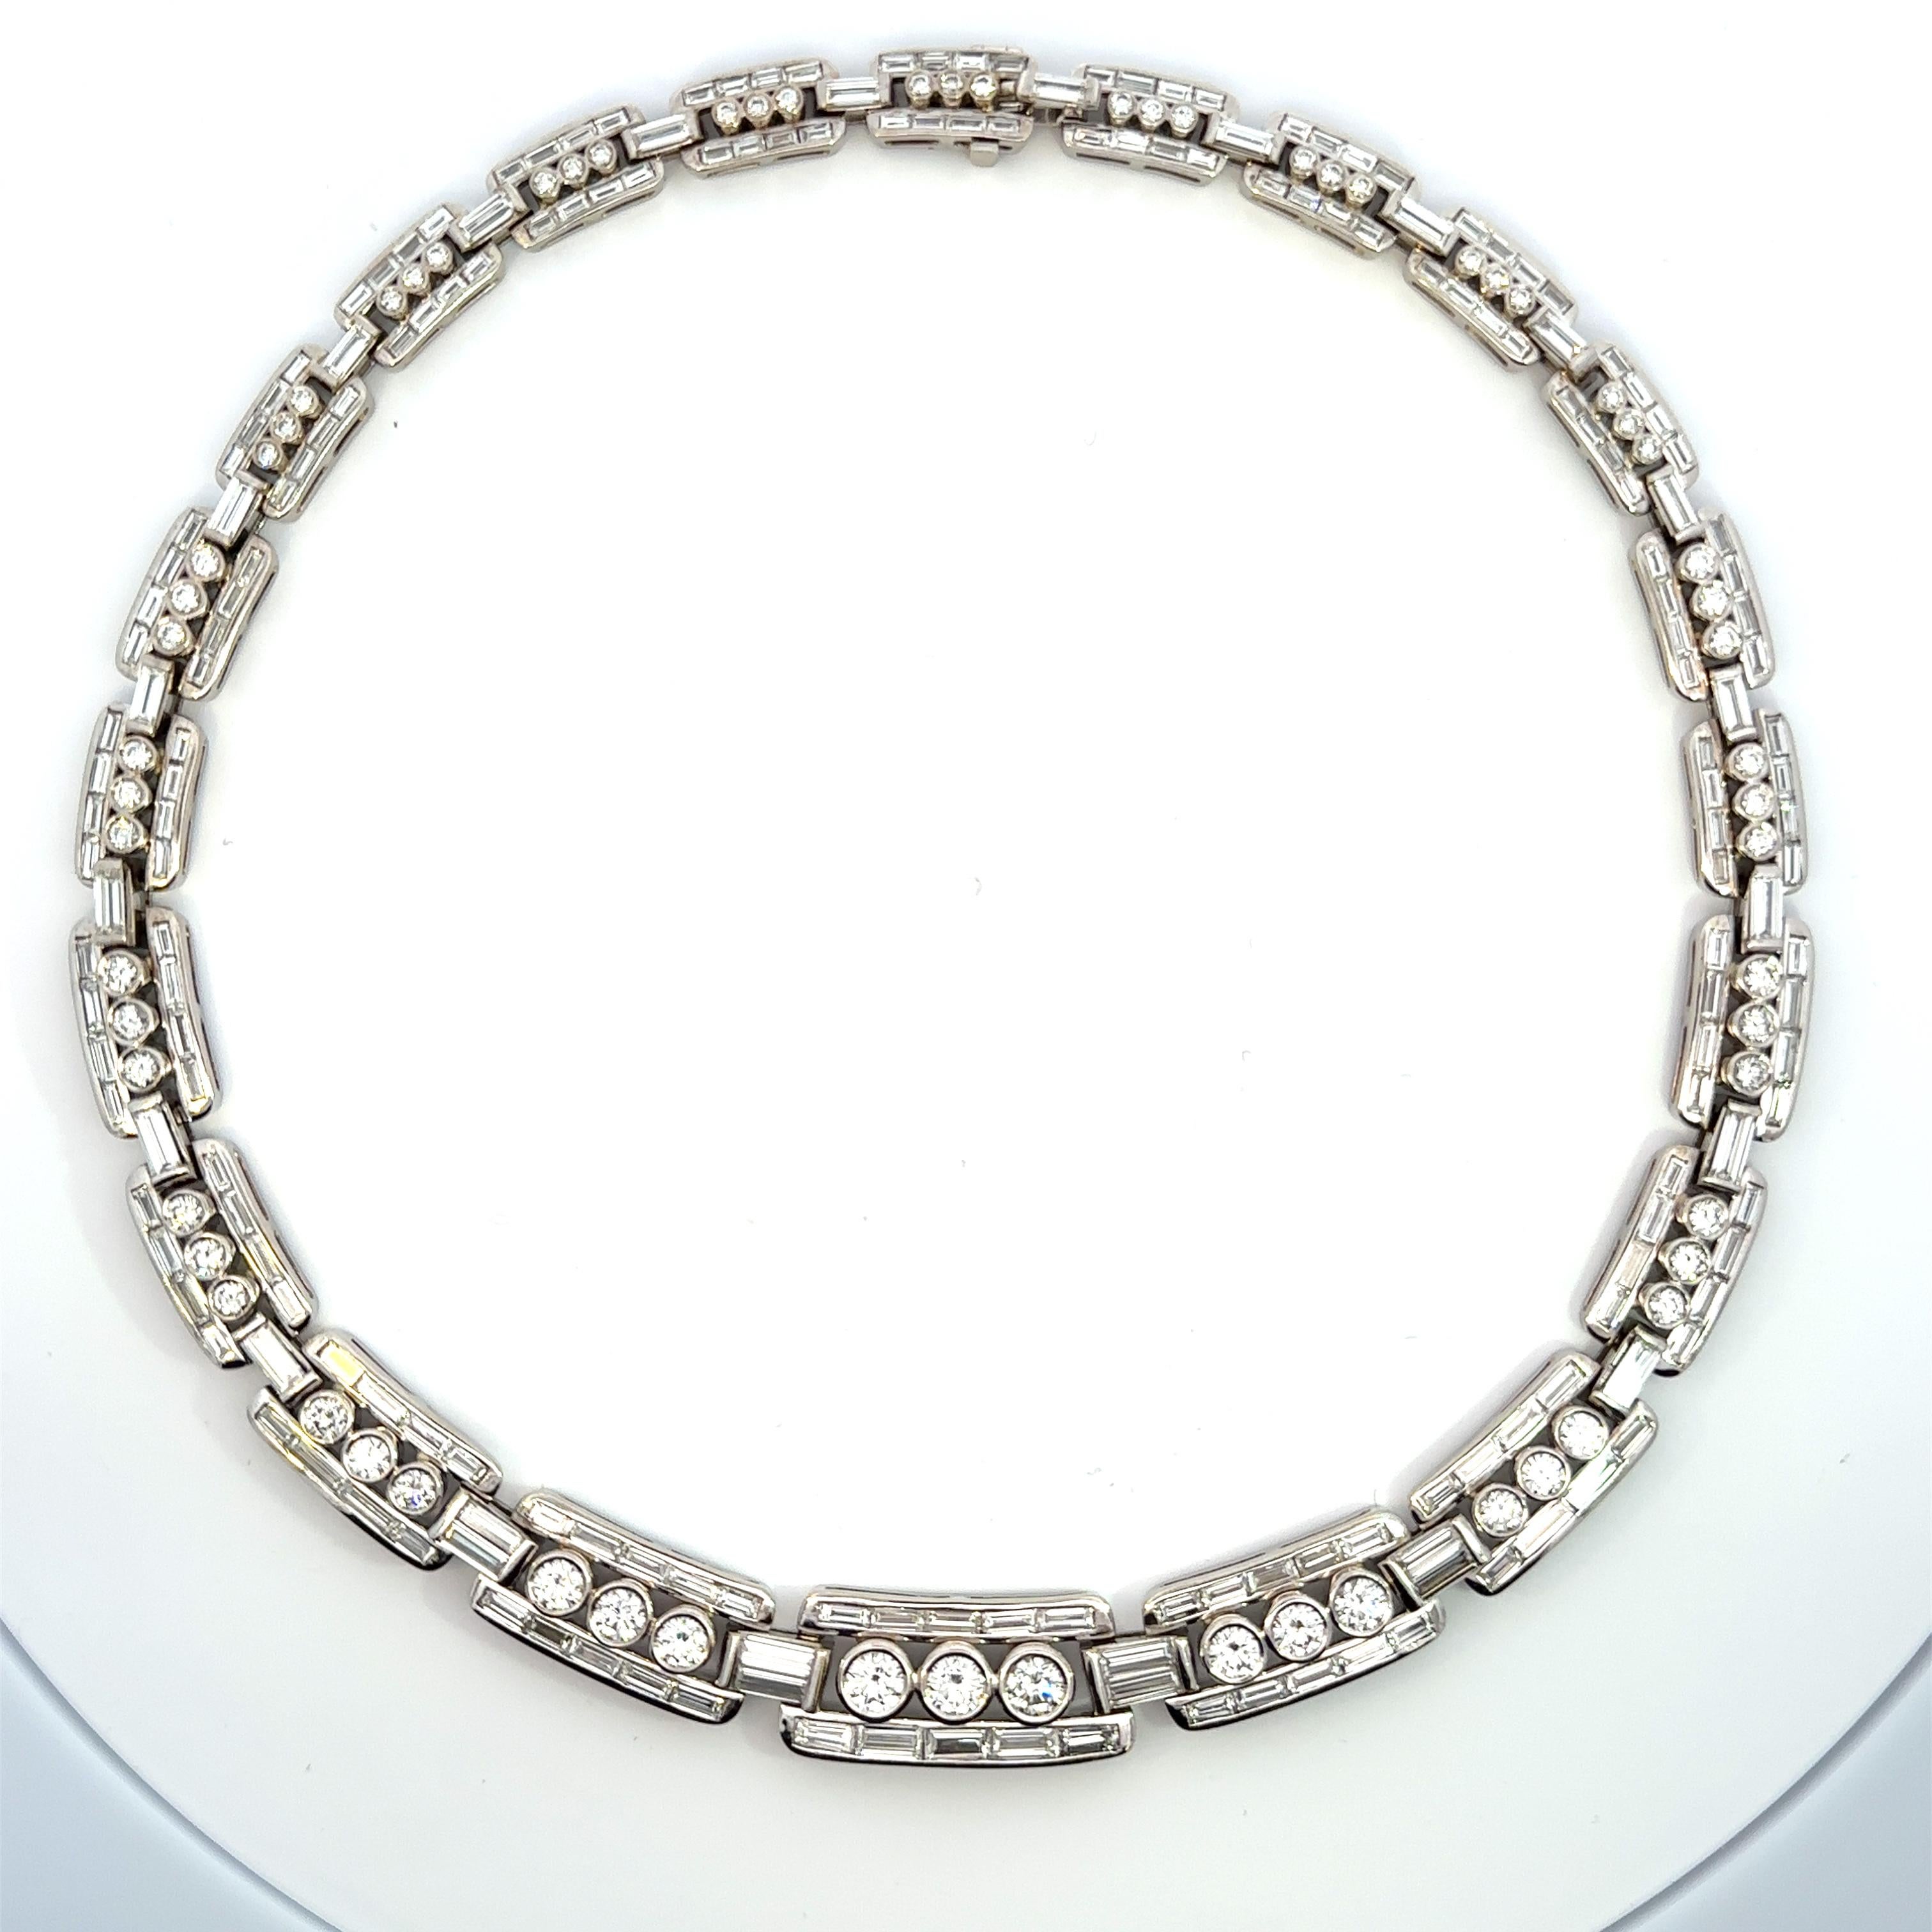 One of a kind handcrafted diamond evening necklace magnificently channel set with diamond baguettes and bezel set with brilliant cut diamonds in 18kt white gold. 

274 diamonds in total Weighing 24.13ct total weight F-G/VS quality

18kt white gold